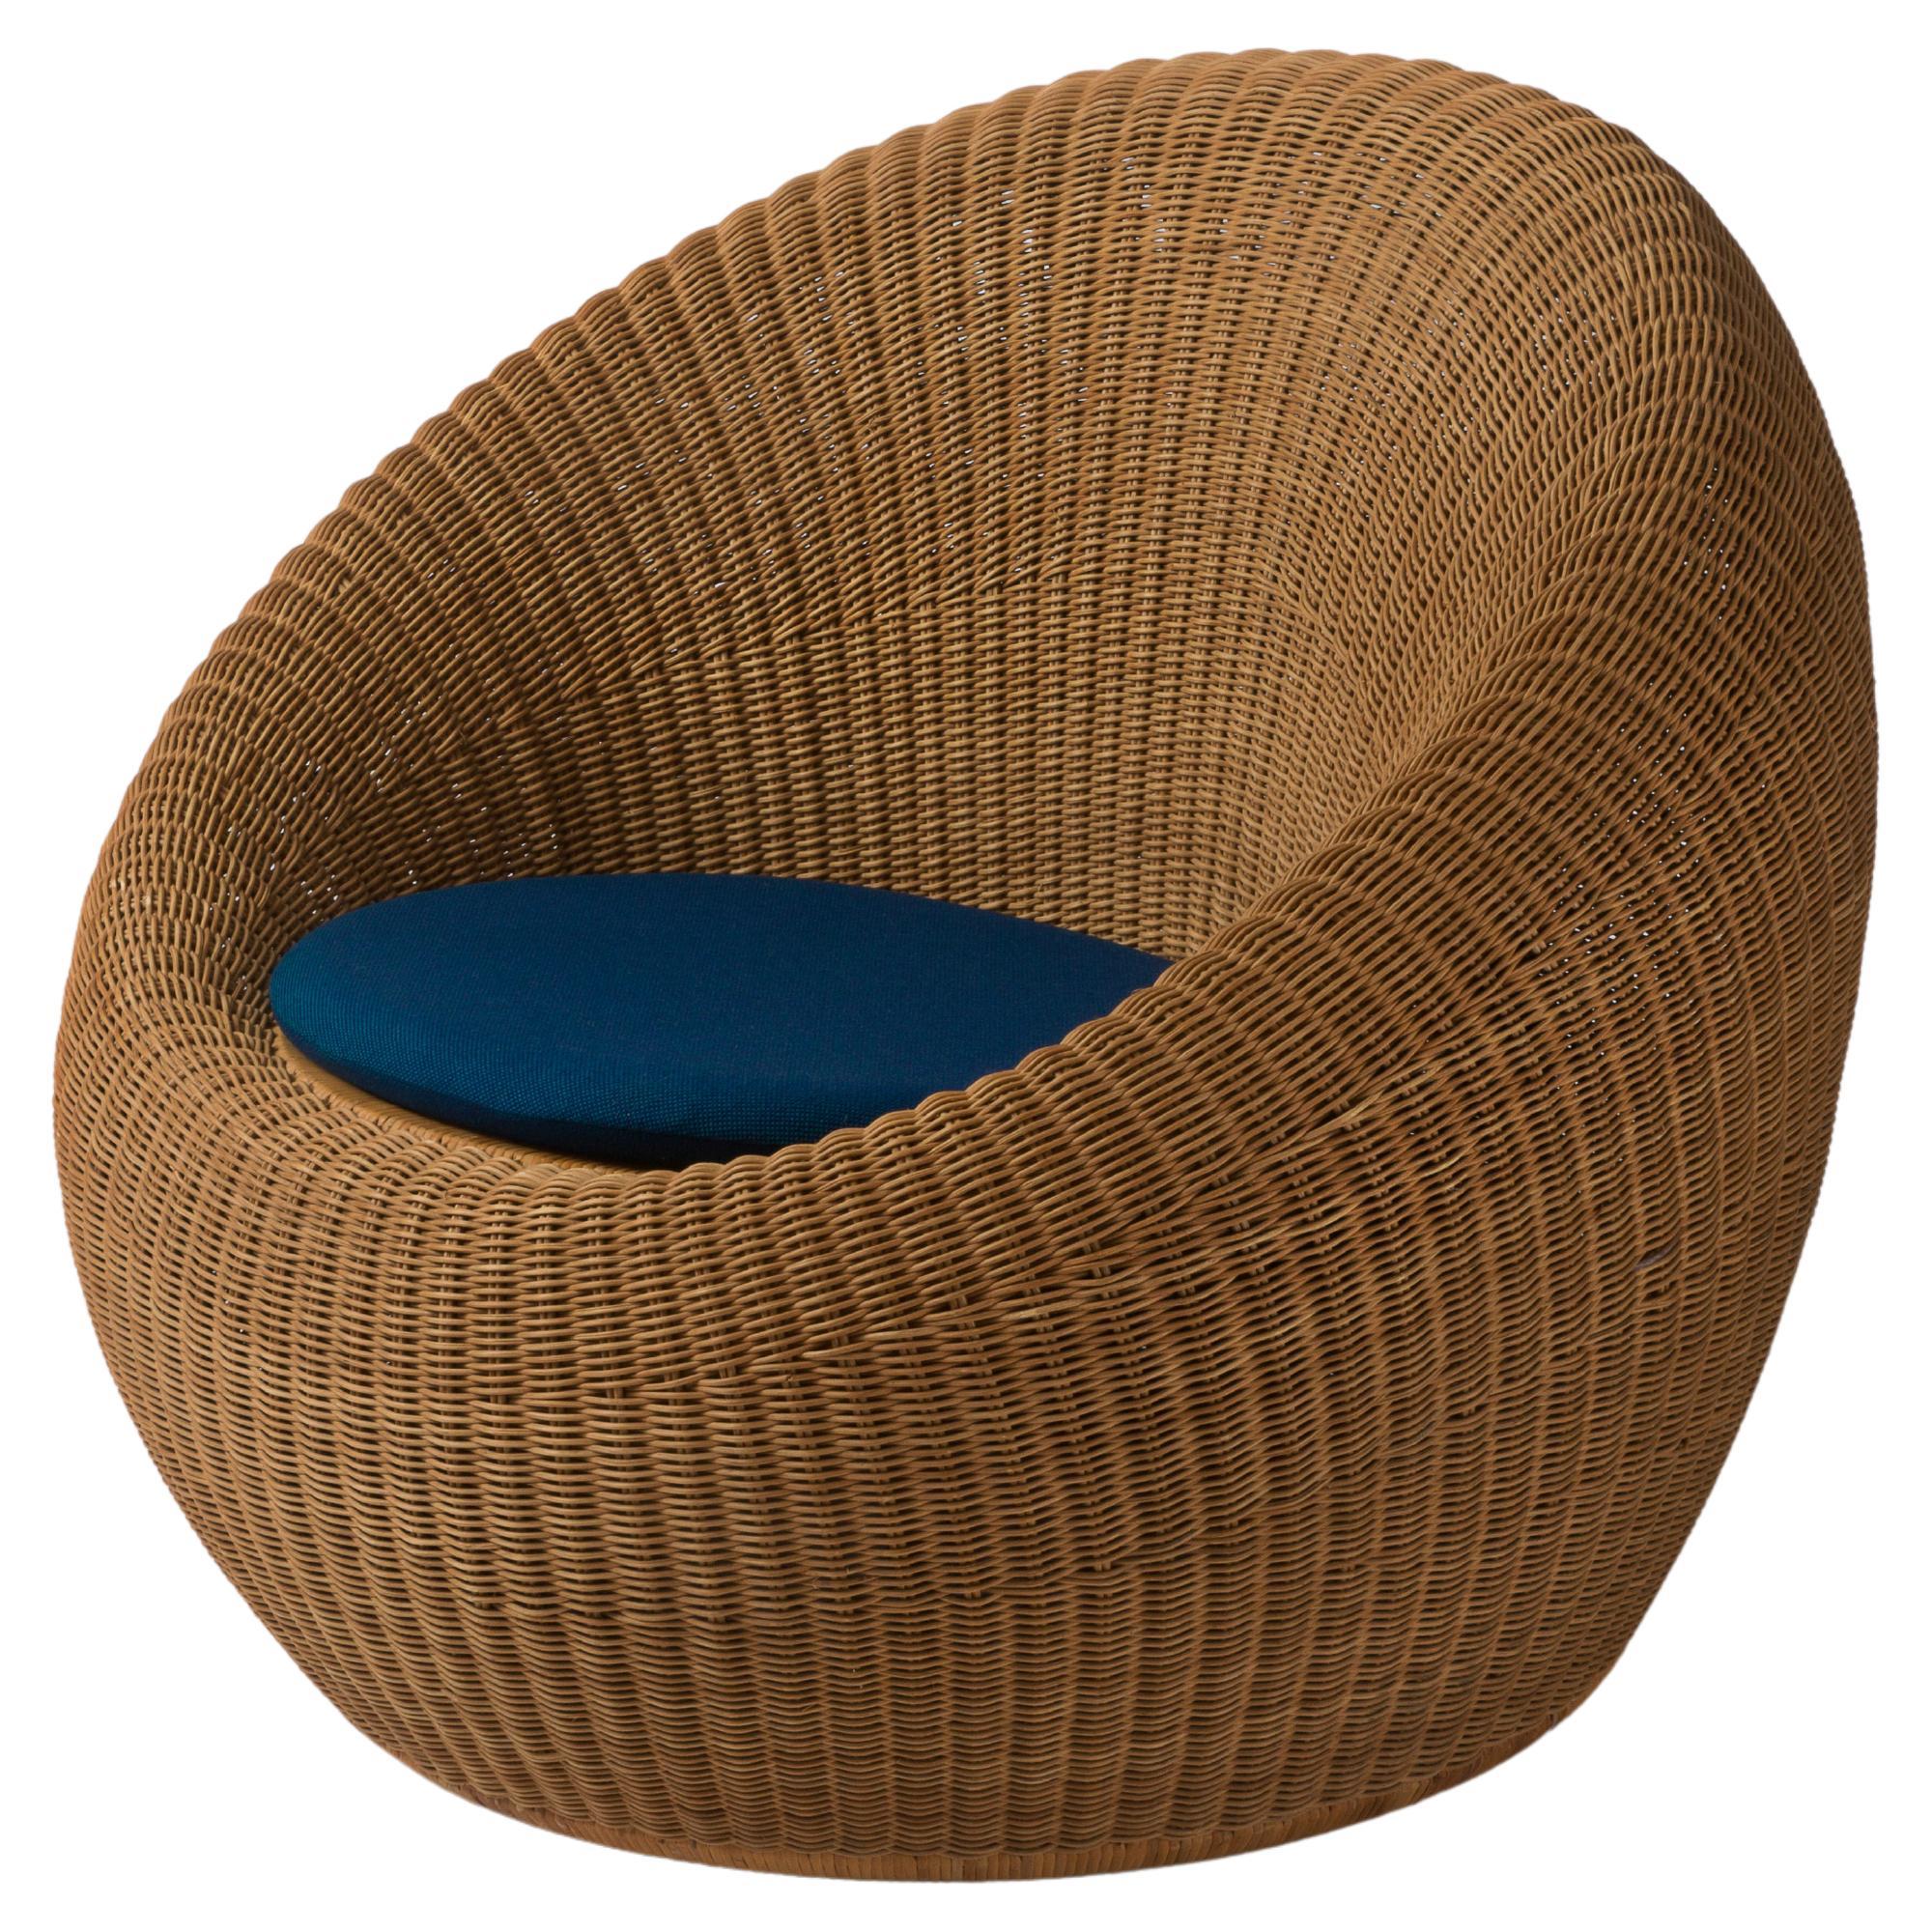 Isamu Kenmochi Easy Chair from the "Rattan Furnitures" Series, circa 1958